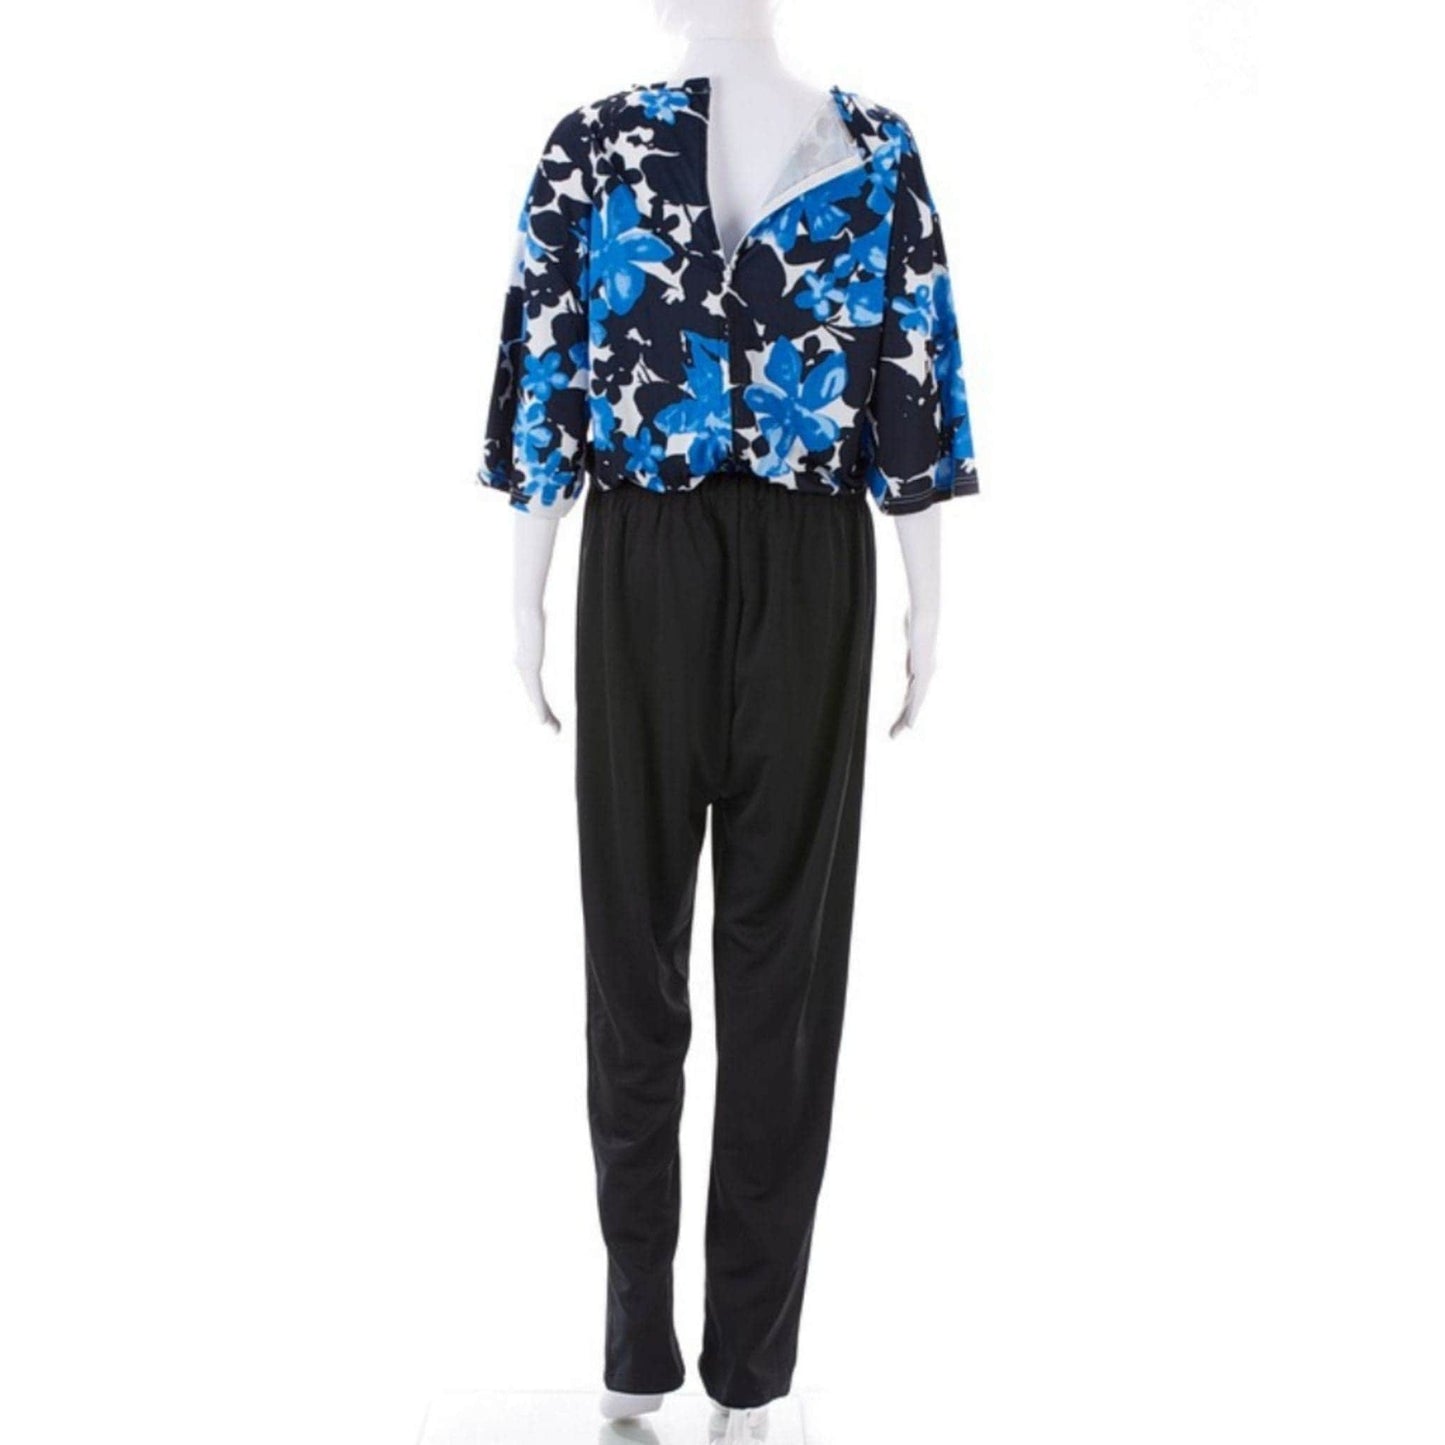 CC Women's Daisy Day Jumpsuit / Onesie - Blue Floral - Caring Clothing